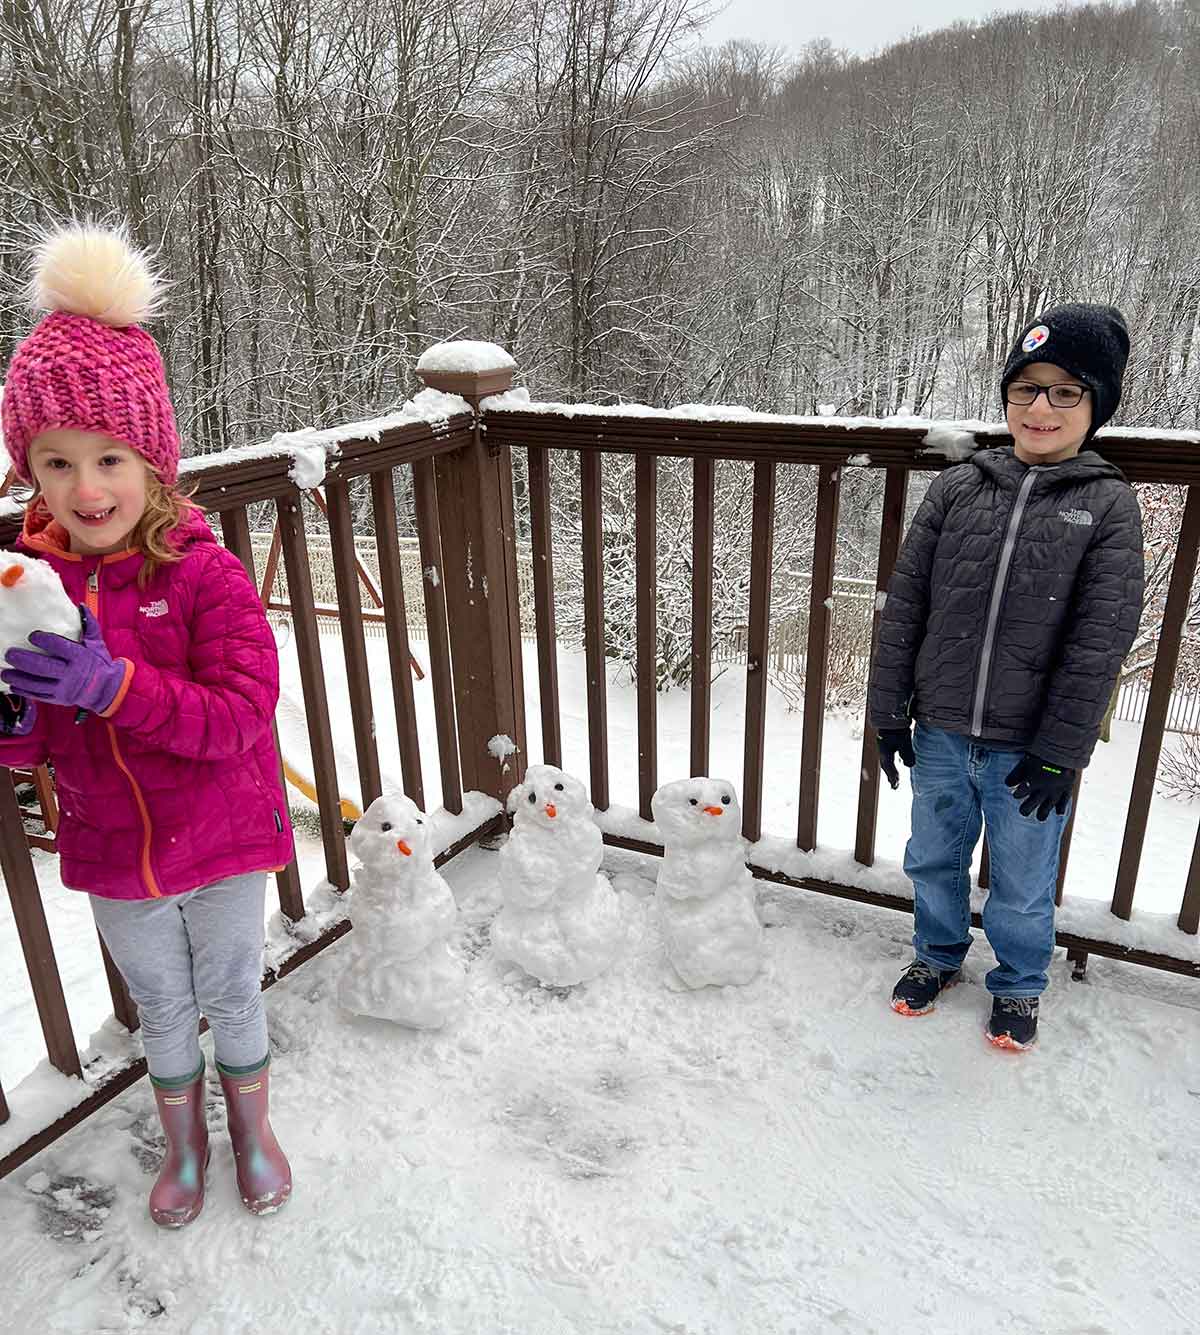 Two kids standing on a snowy deck with three small snowmen between them.